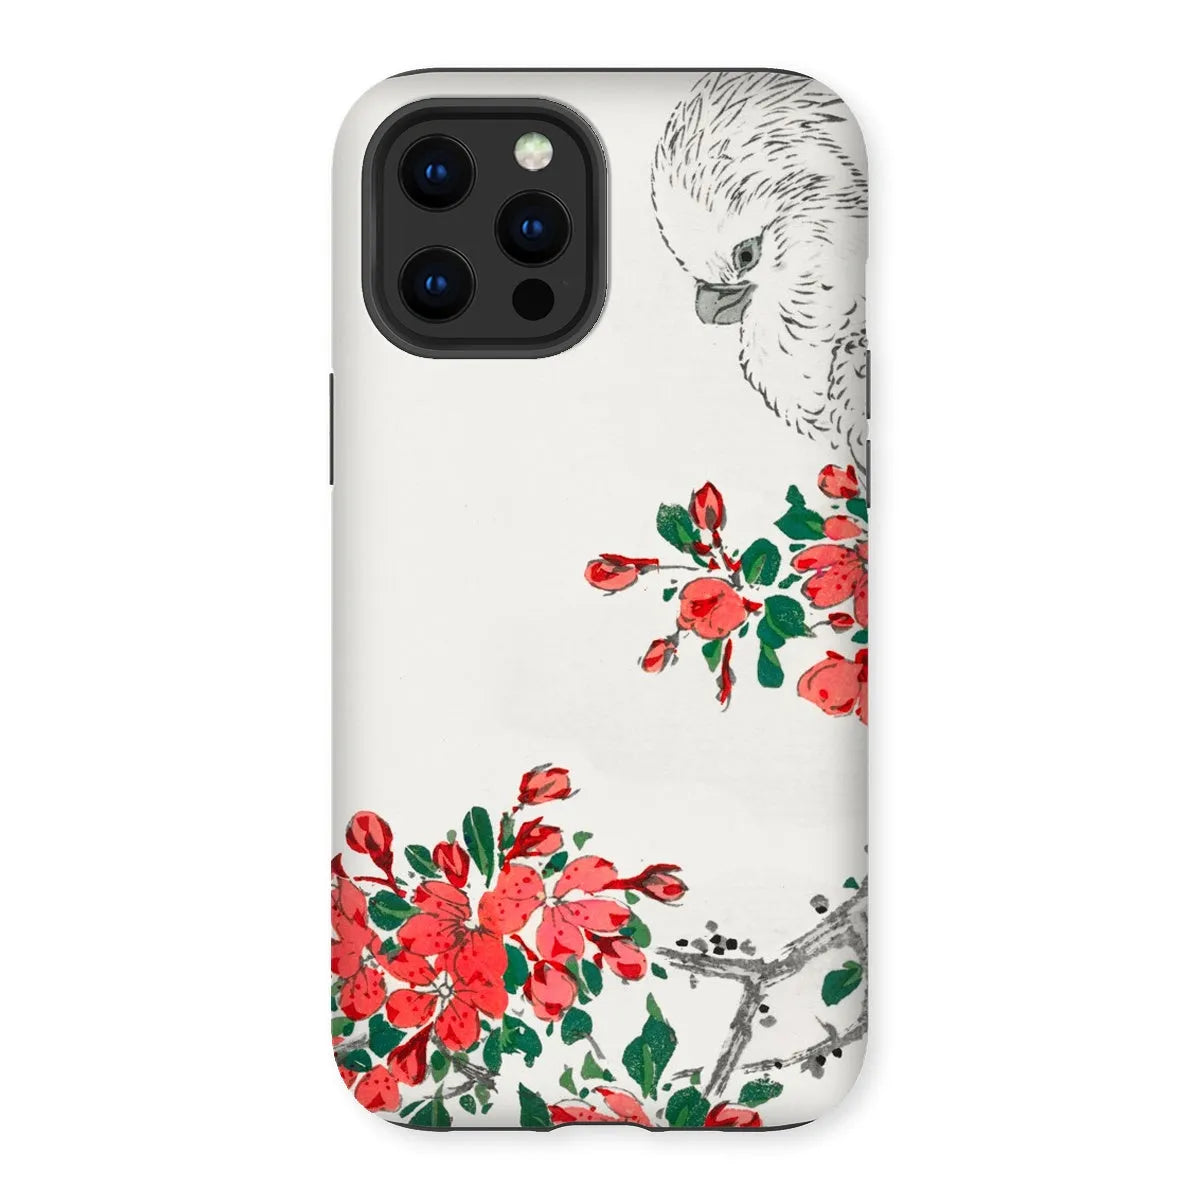 Parrot And Pyrus - Japanese Bird Phone Case - Numata Kashu - Iphone 12 Pro Max / Matte - Mobile Phone Cases - Aesthetic